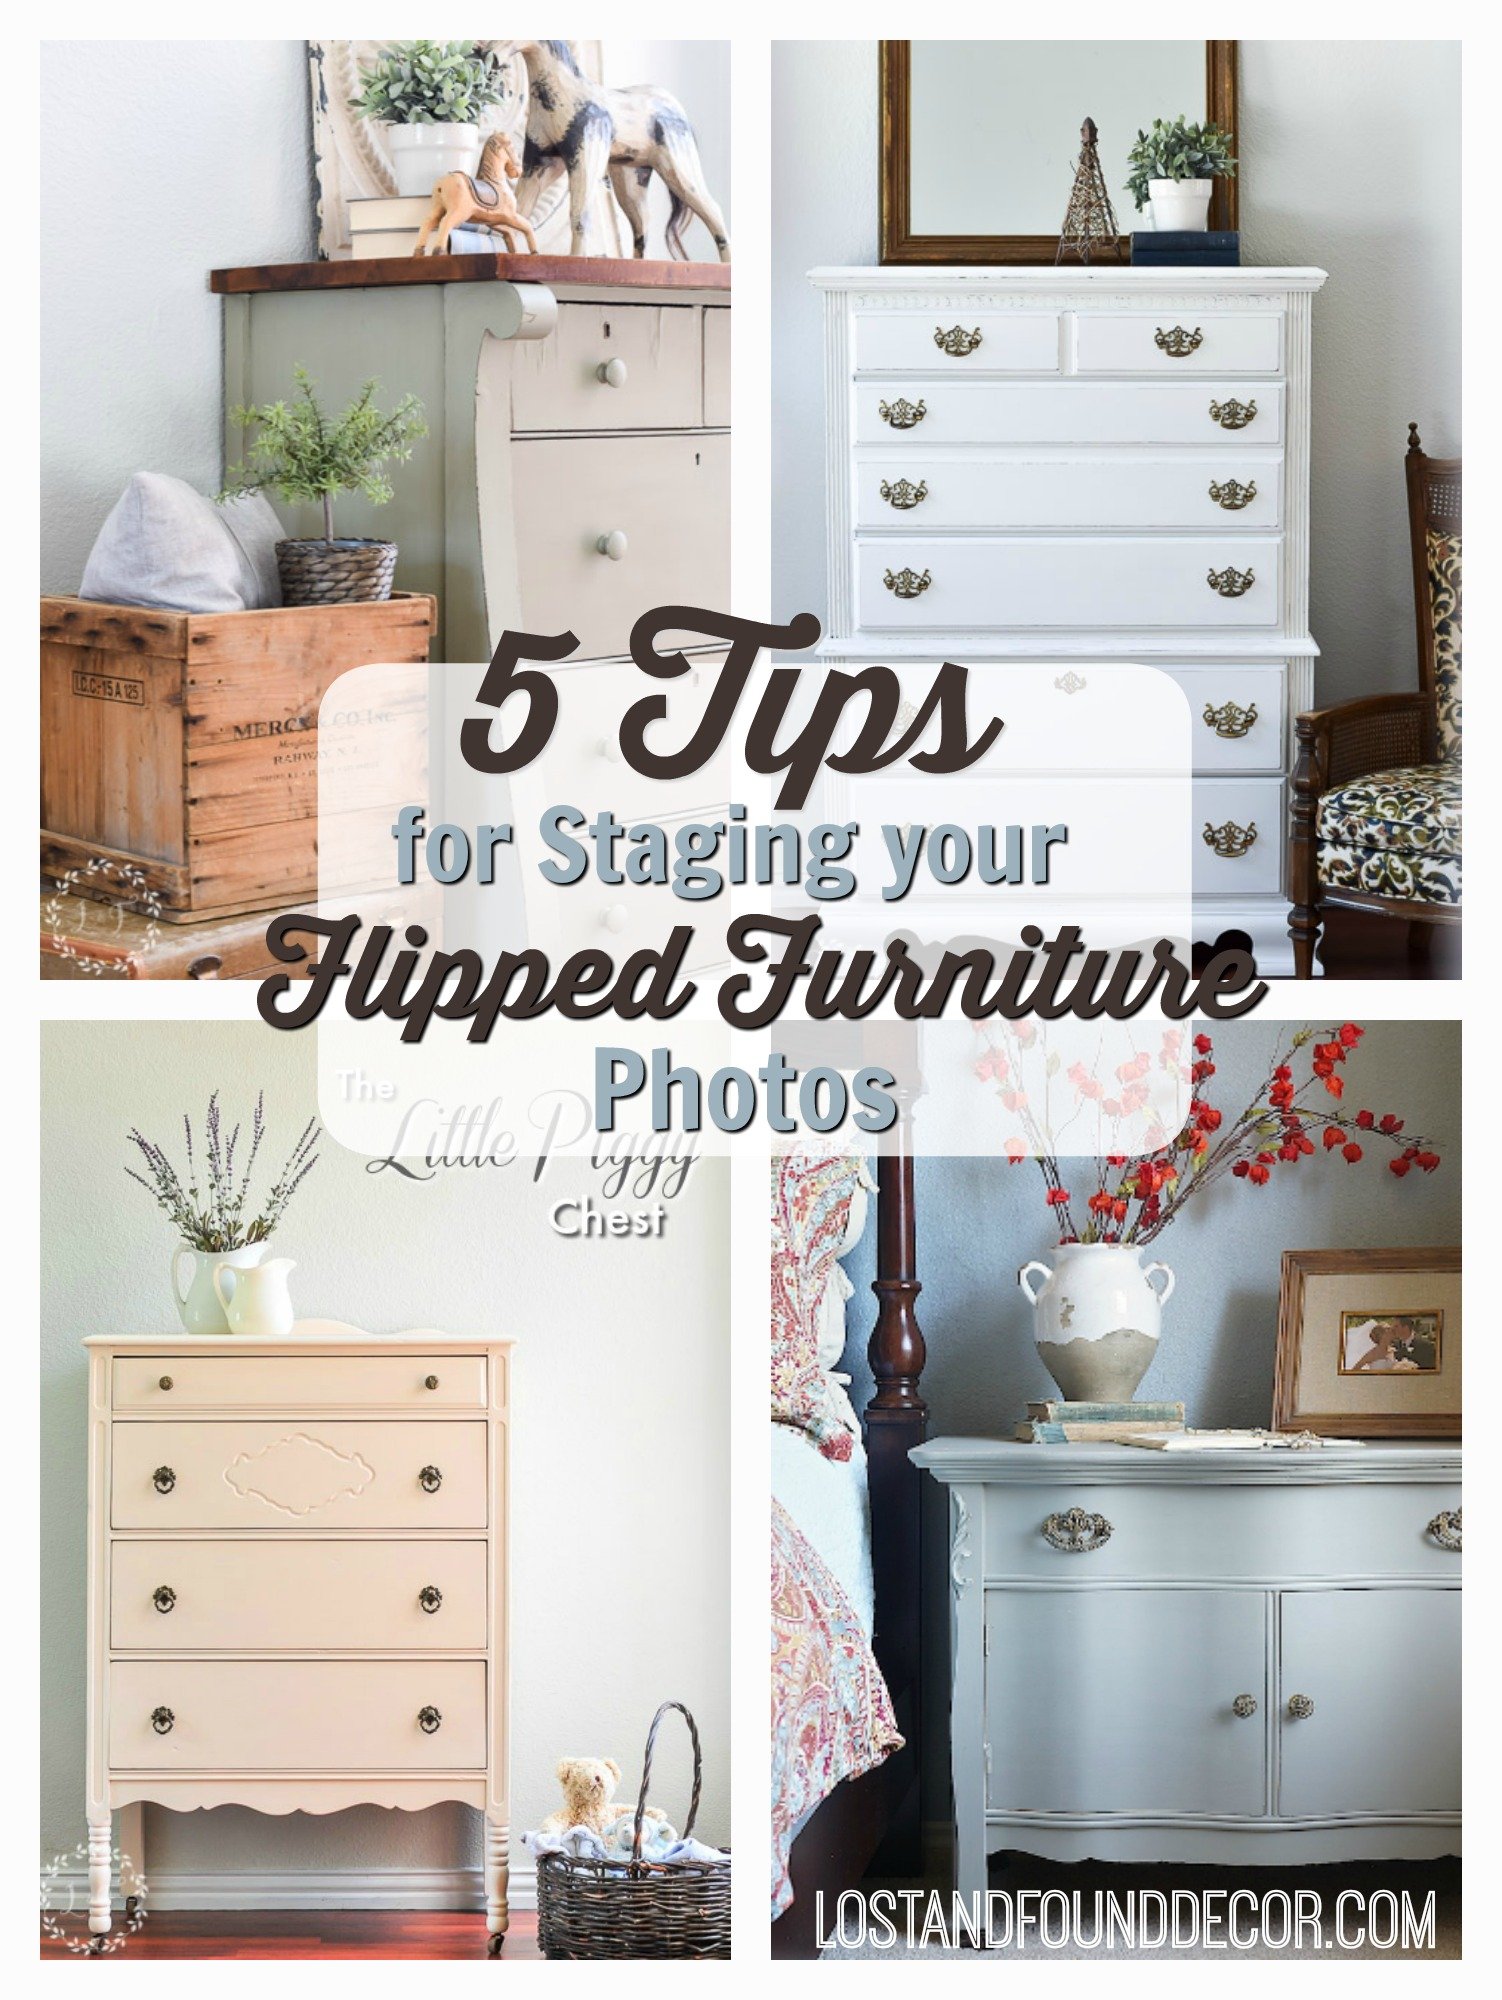 5-Tips-for-staging-flipped-furniture-photos.jpg